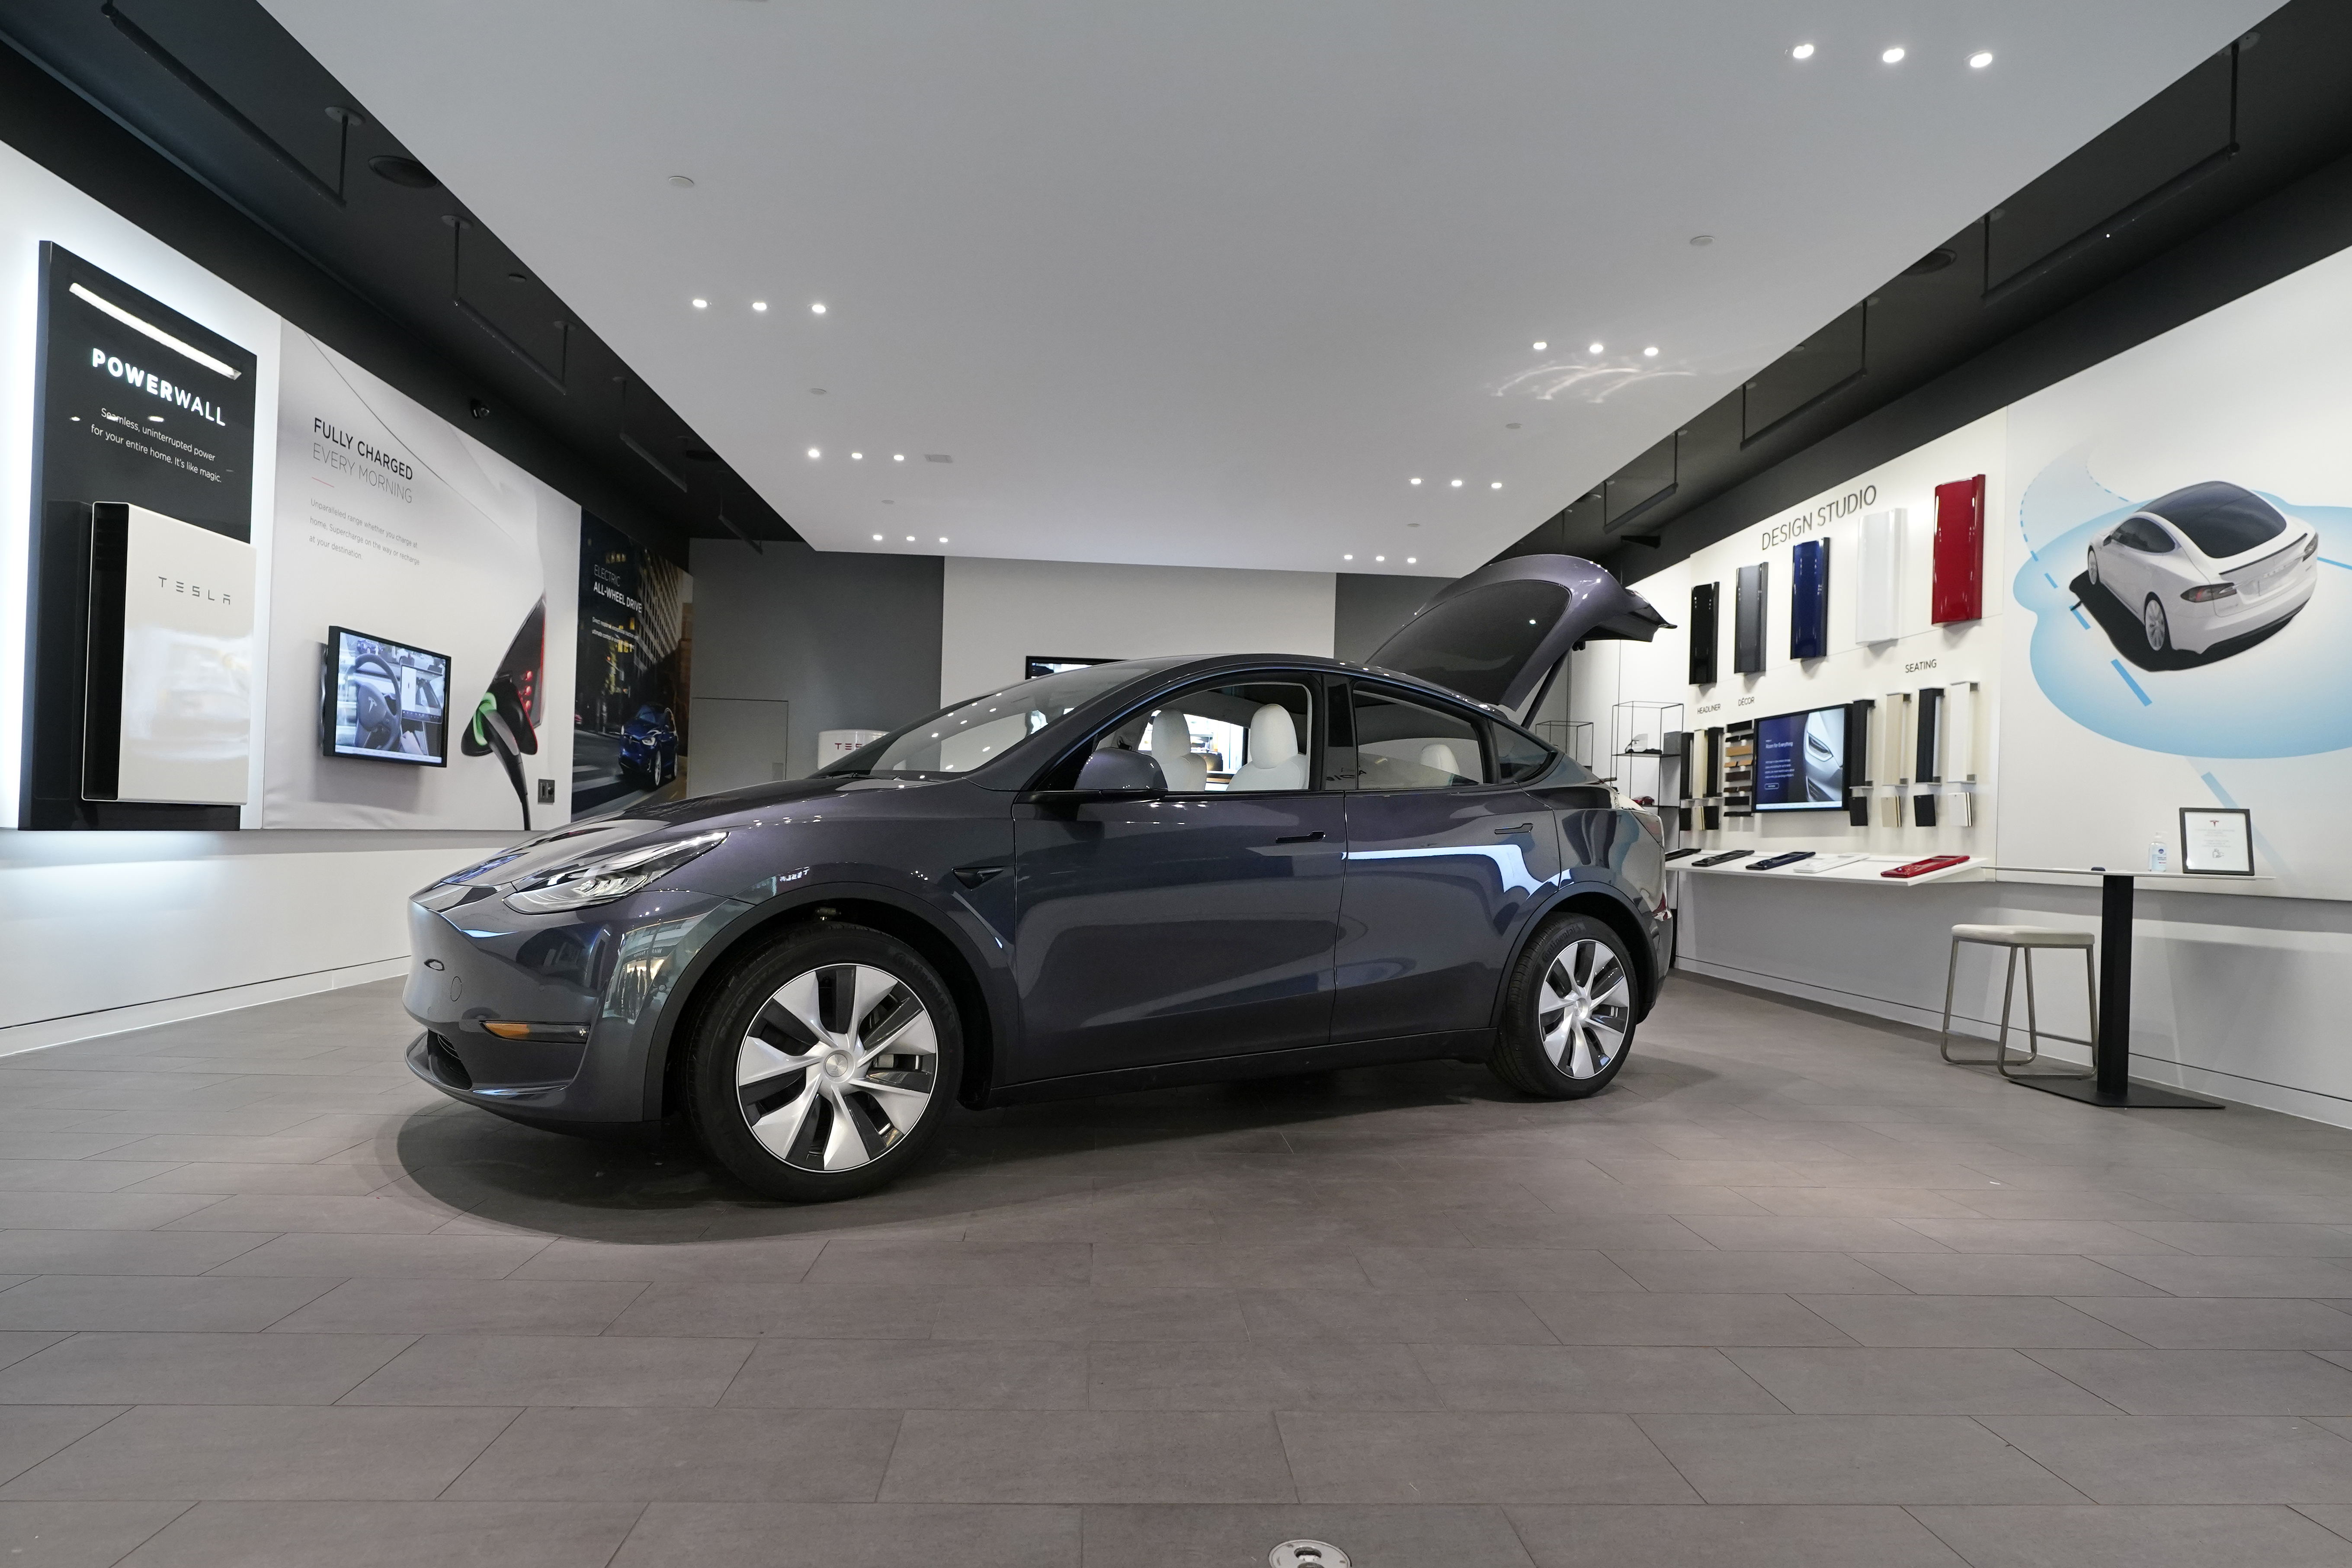 Tesla Model Y Dual Motor AWD Long Range $45560 + $7,500 Federal Tax Credit  (For Qualifying Buyers) in Investory